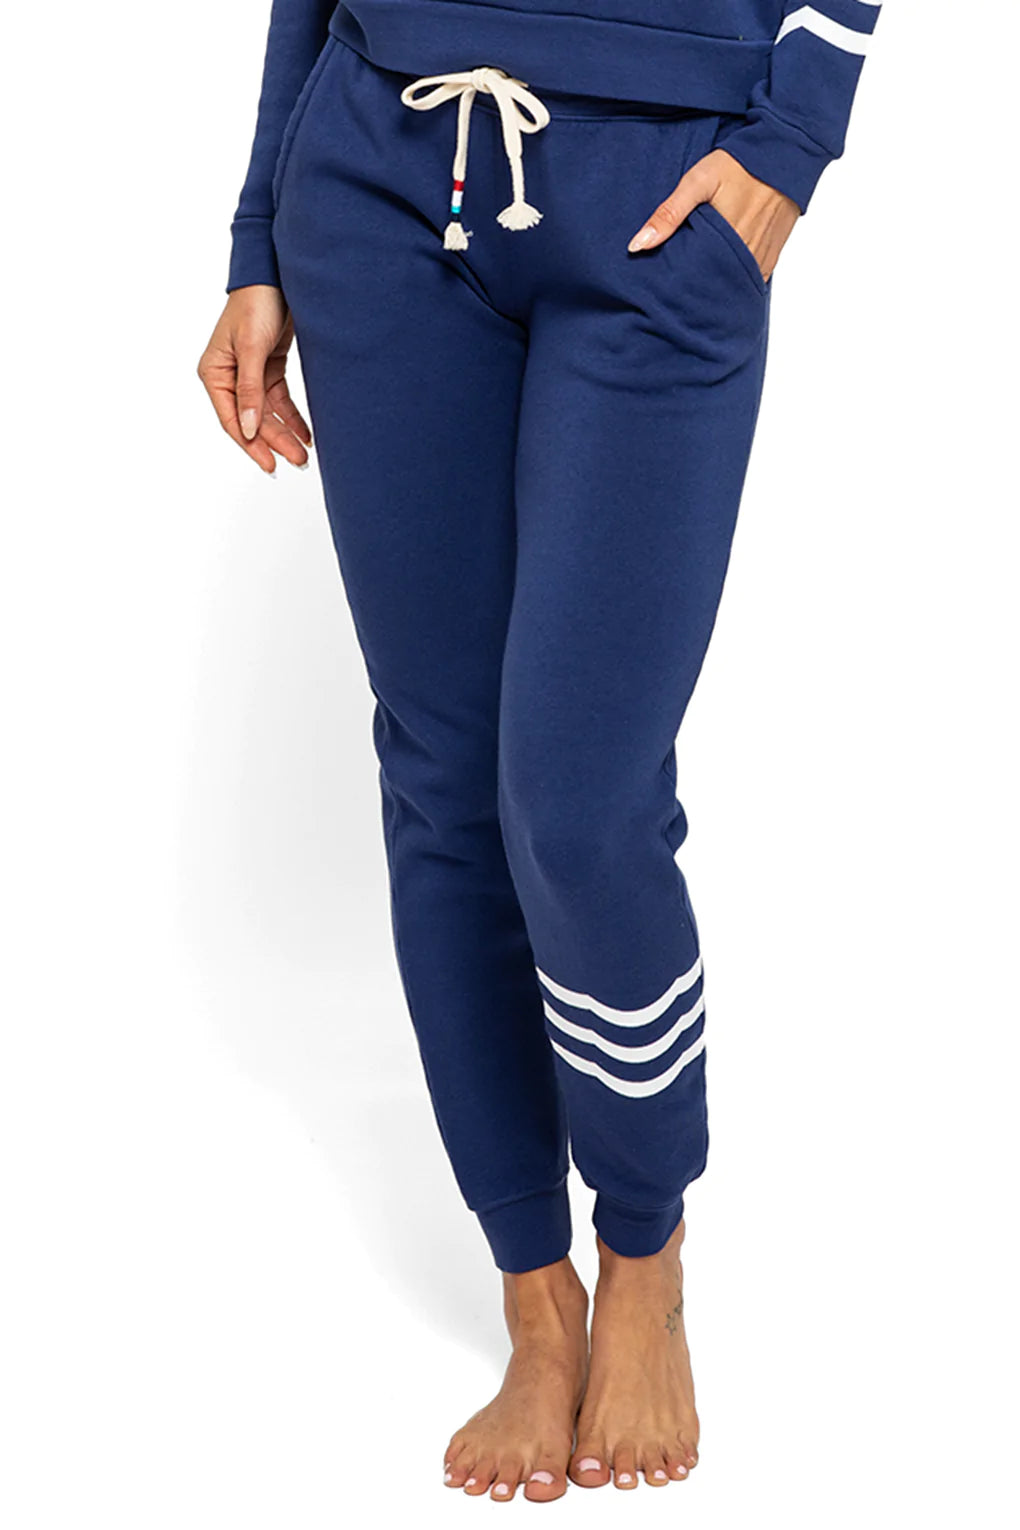 SOL ANGELES WOMENS WAVES JOGGER BLUE JAY